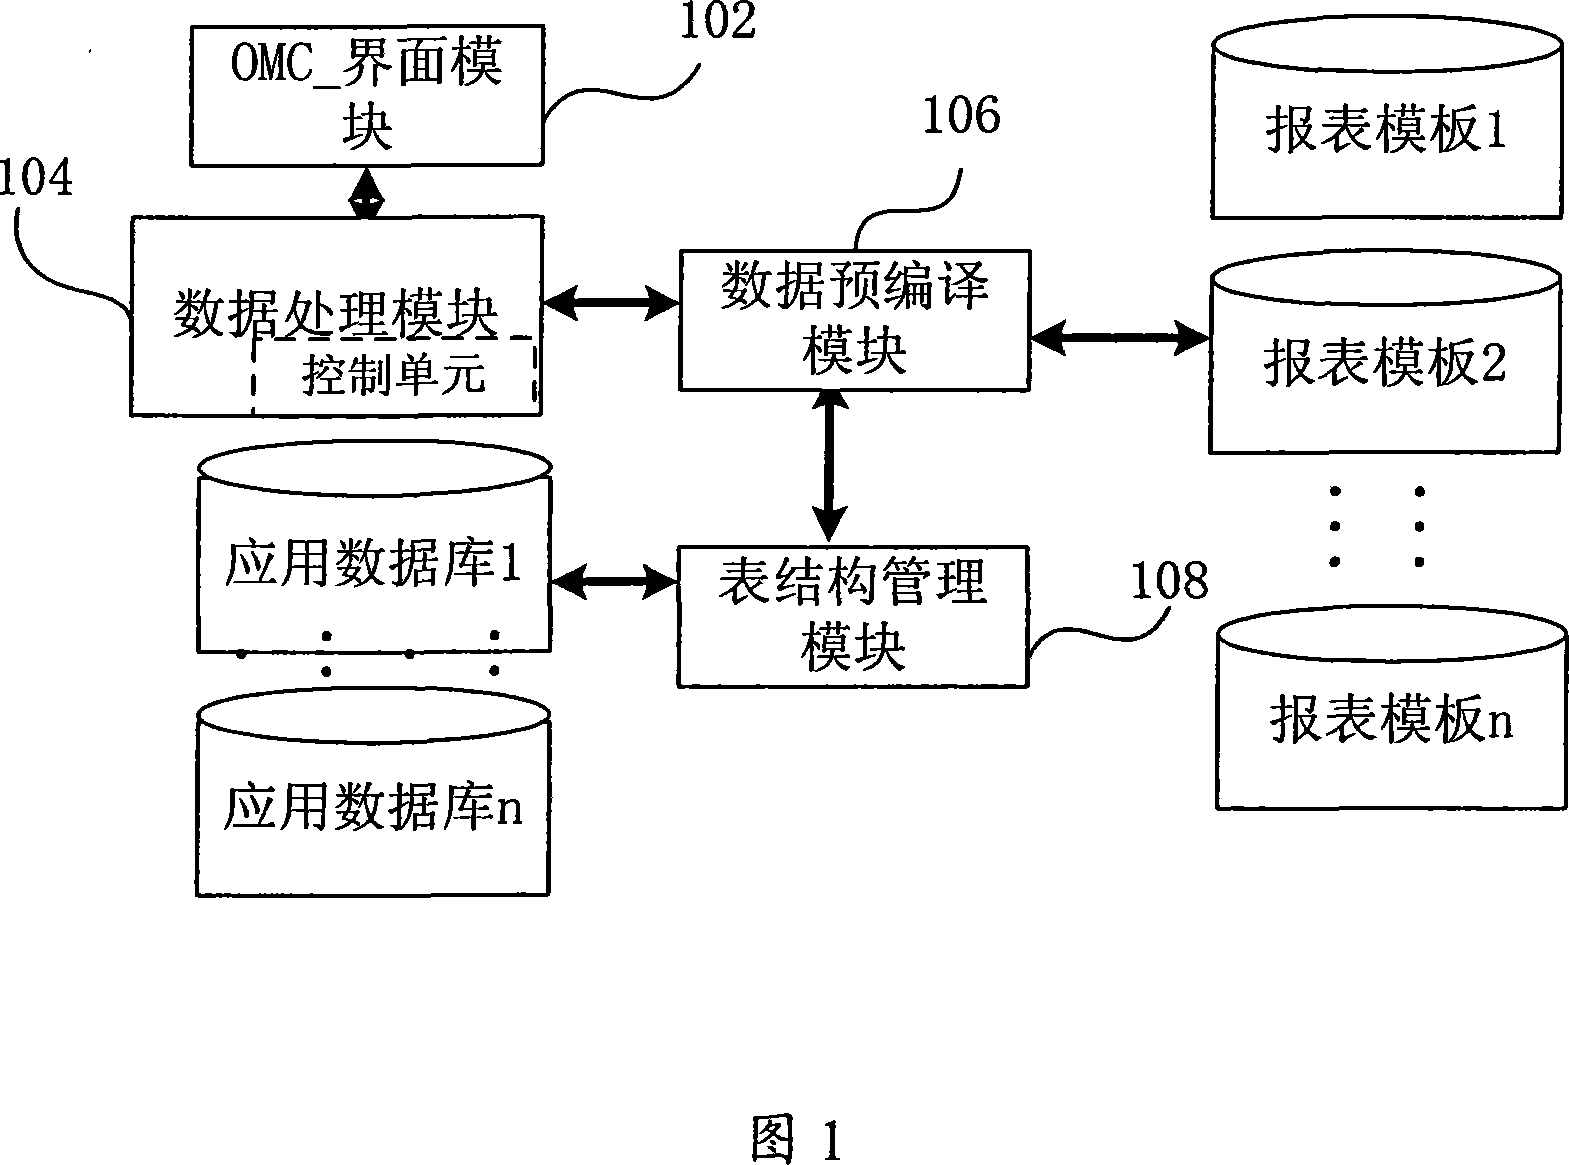 Method for quick finishing large data-handling and reporting system